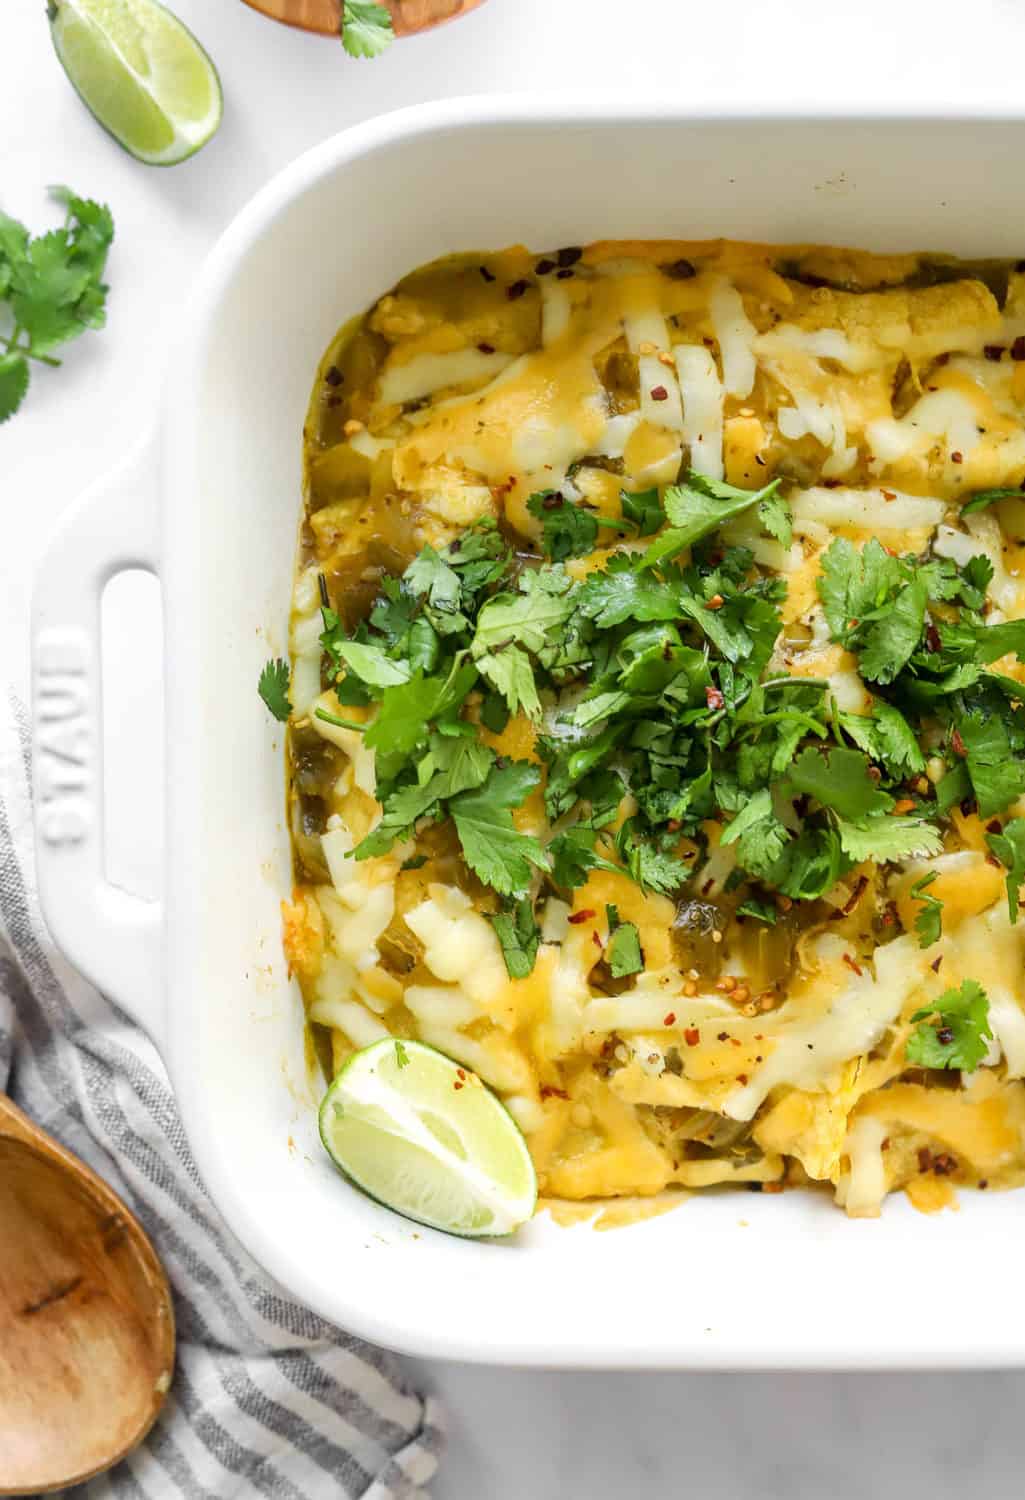 Half pan shot of a white baking dish of enchiladas covered in melted cheddar cheese and topped with green herbs with a wooden spoon on a stripped linen next to it. 